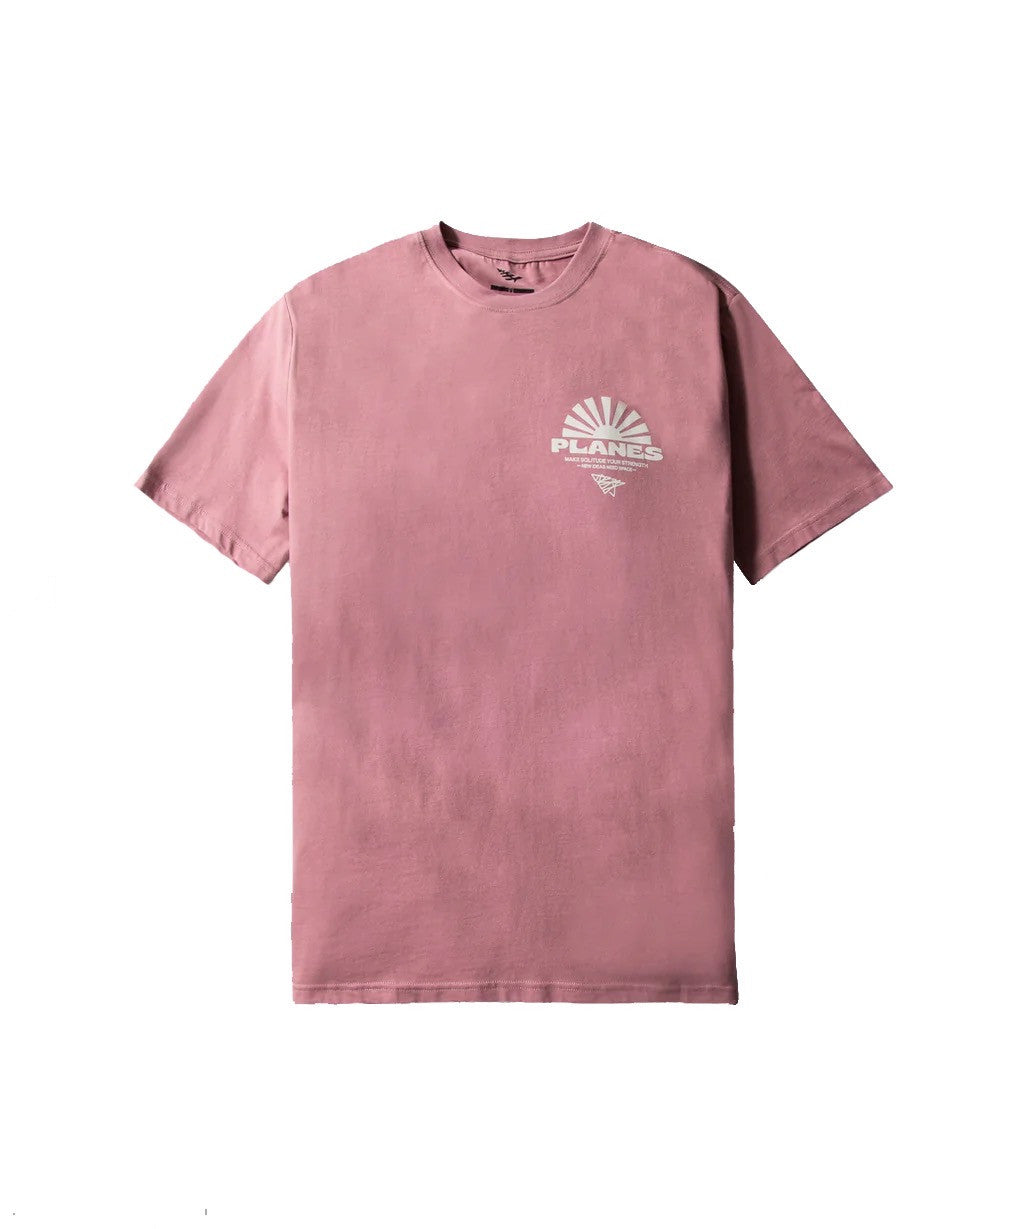 Paper Planes Fortress of Gratitude Tee - Rose